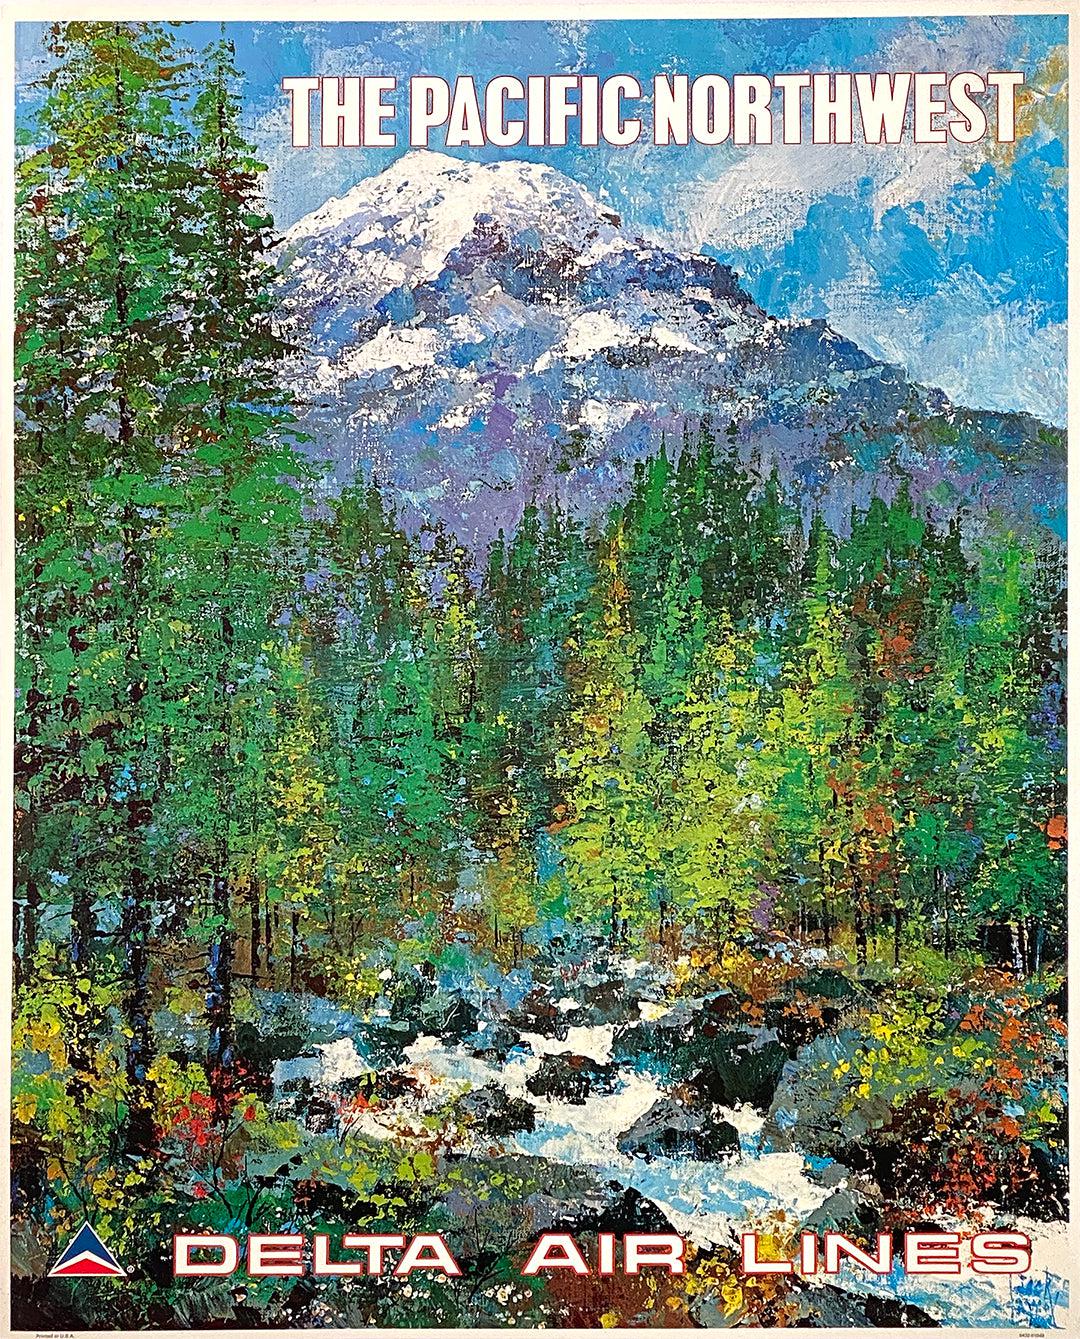 Delta Air Lines Poster for the Pacific Northwest by Jack Laycox 1975